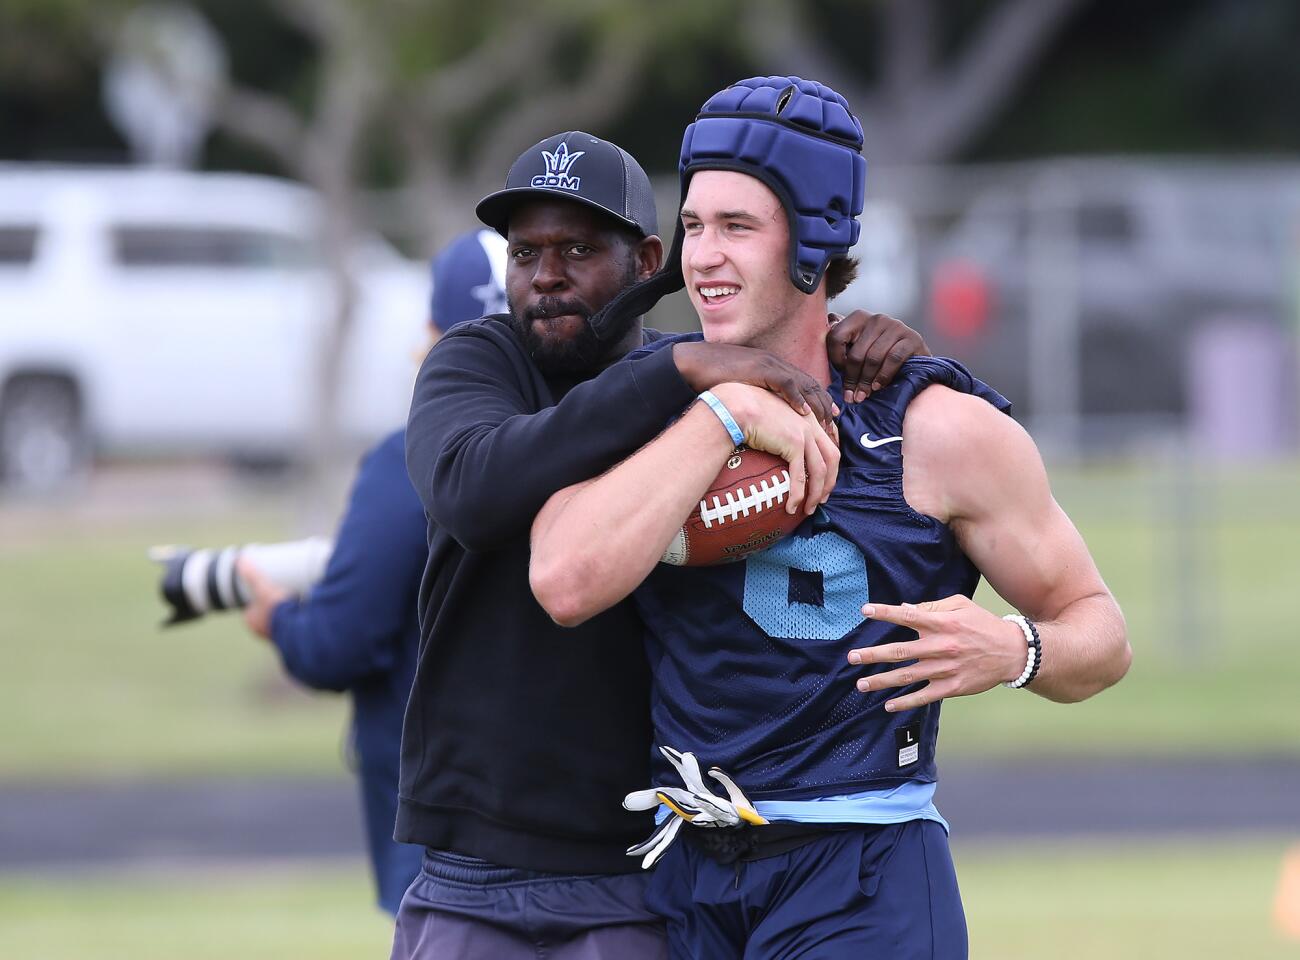 Reciever John Humphreys, right, and coach Karif Byrd have a laugh after big catch during a spring football showcase practice at Corona del Mar High on Wednesday.